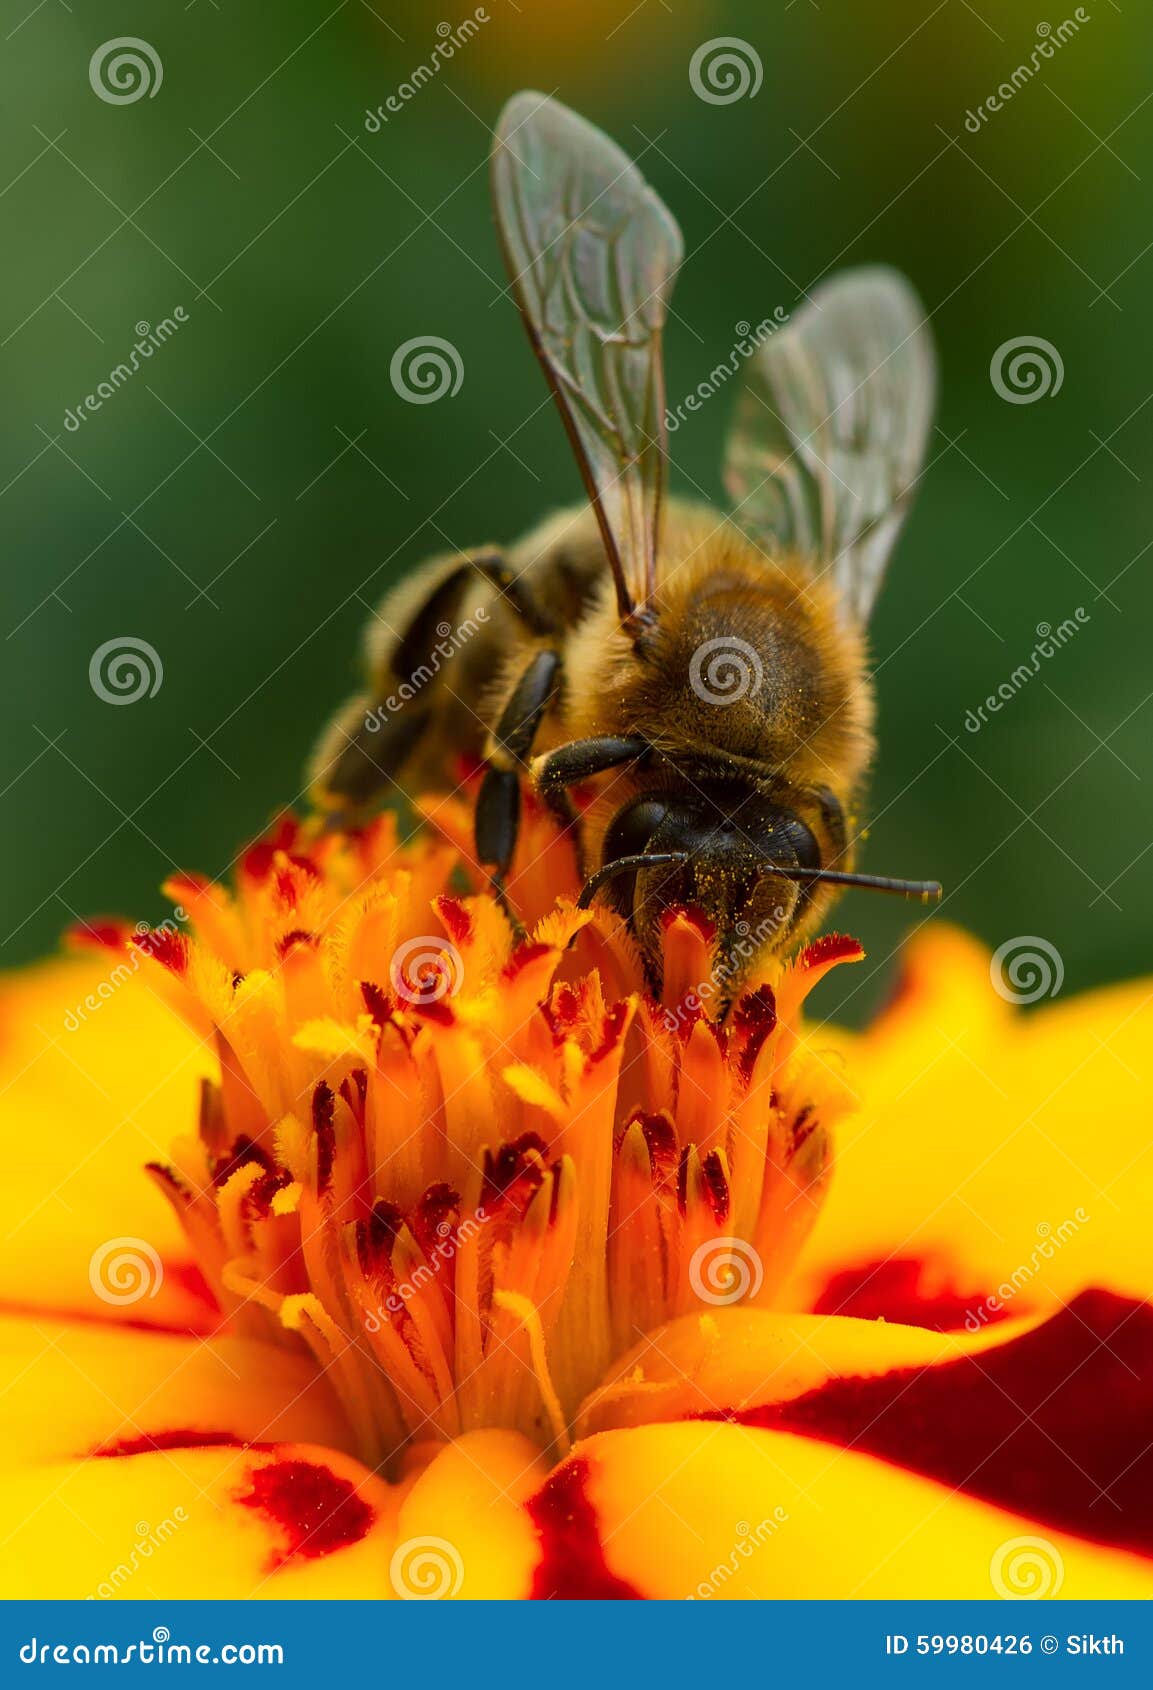 bee pollinating marigold flower close-up